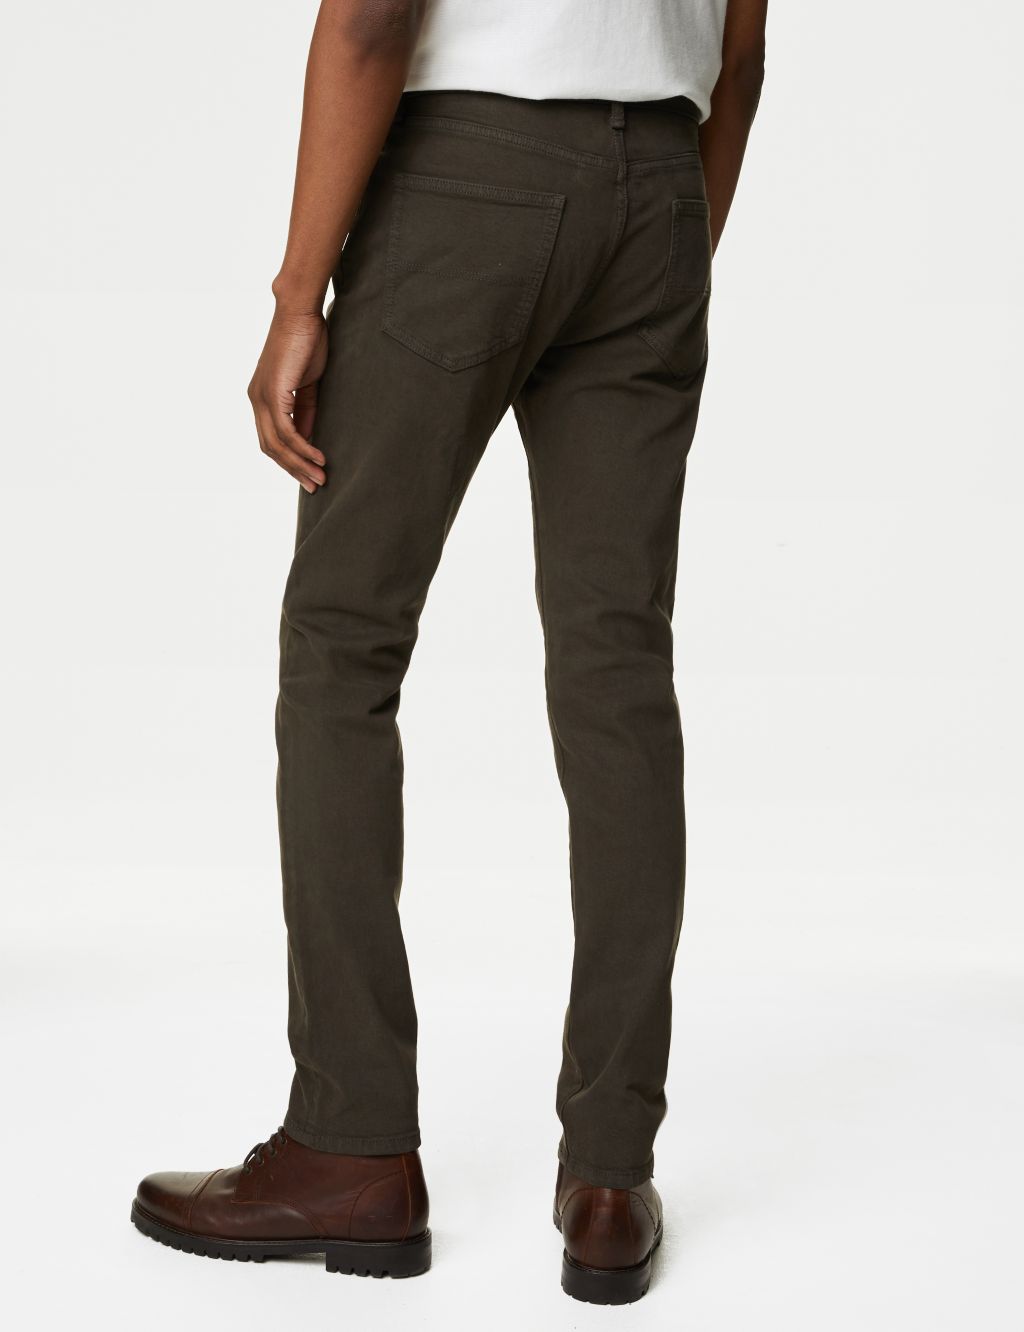 Slim Fit Tea Dyed Stretch Jeans image 5